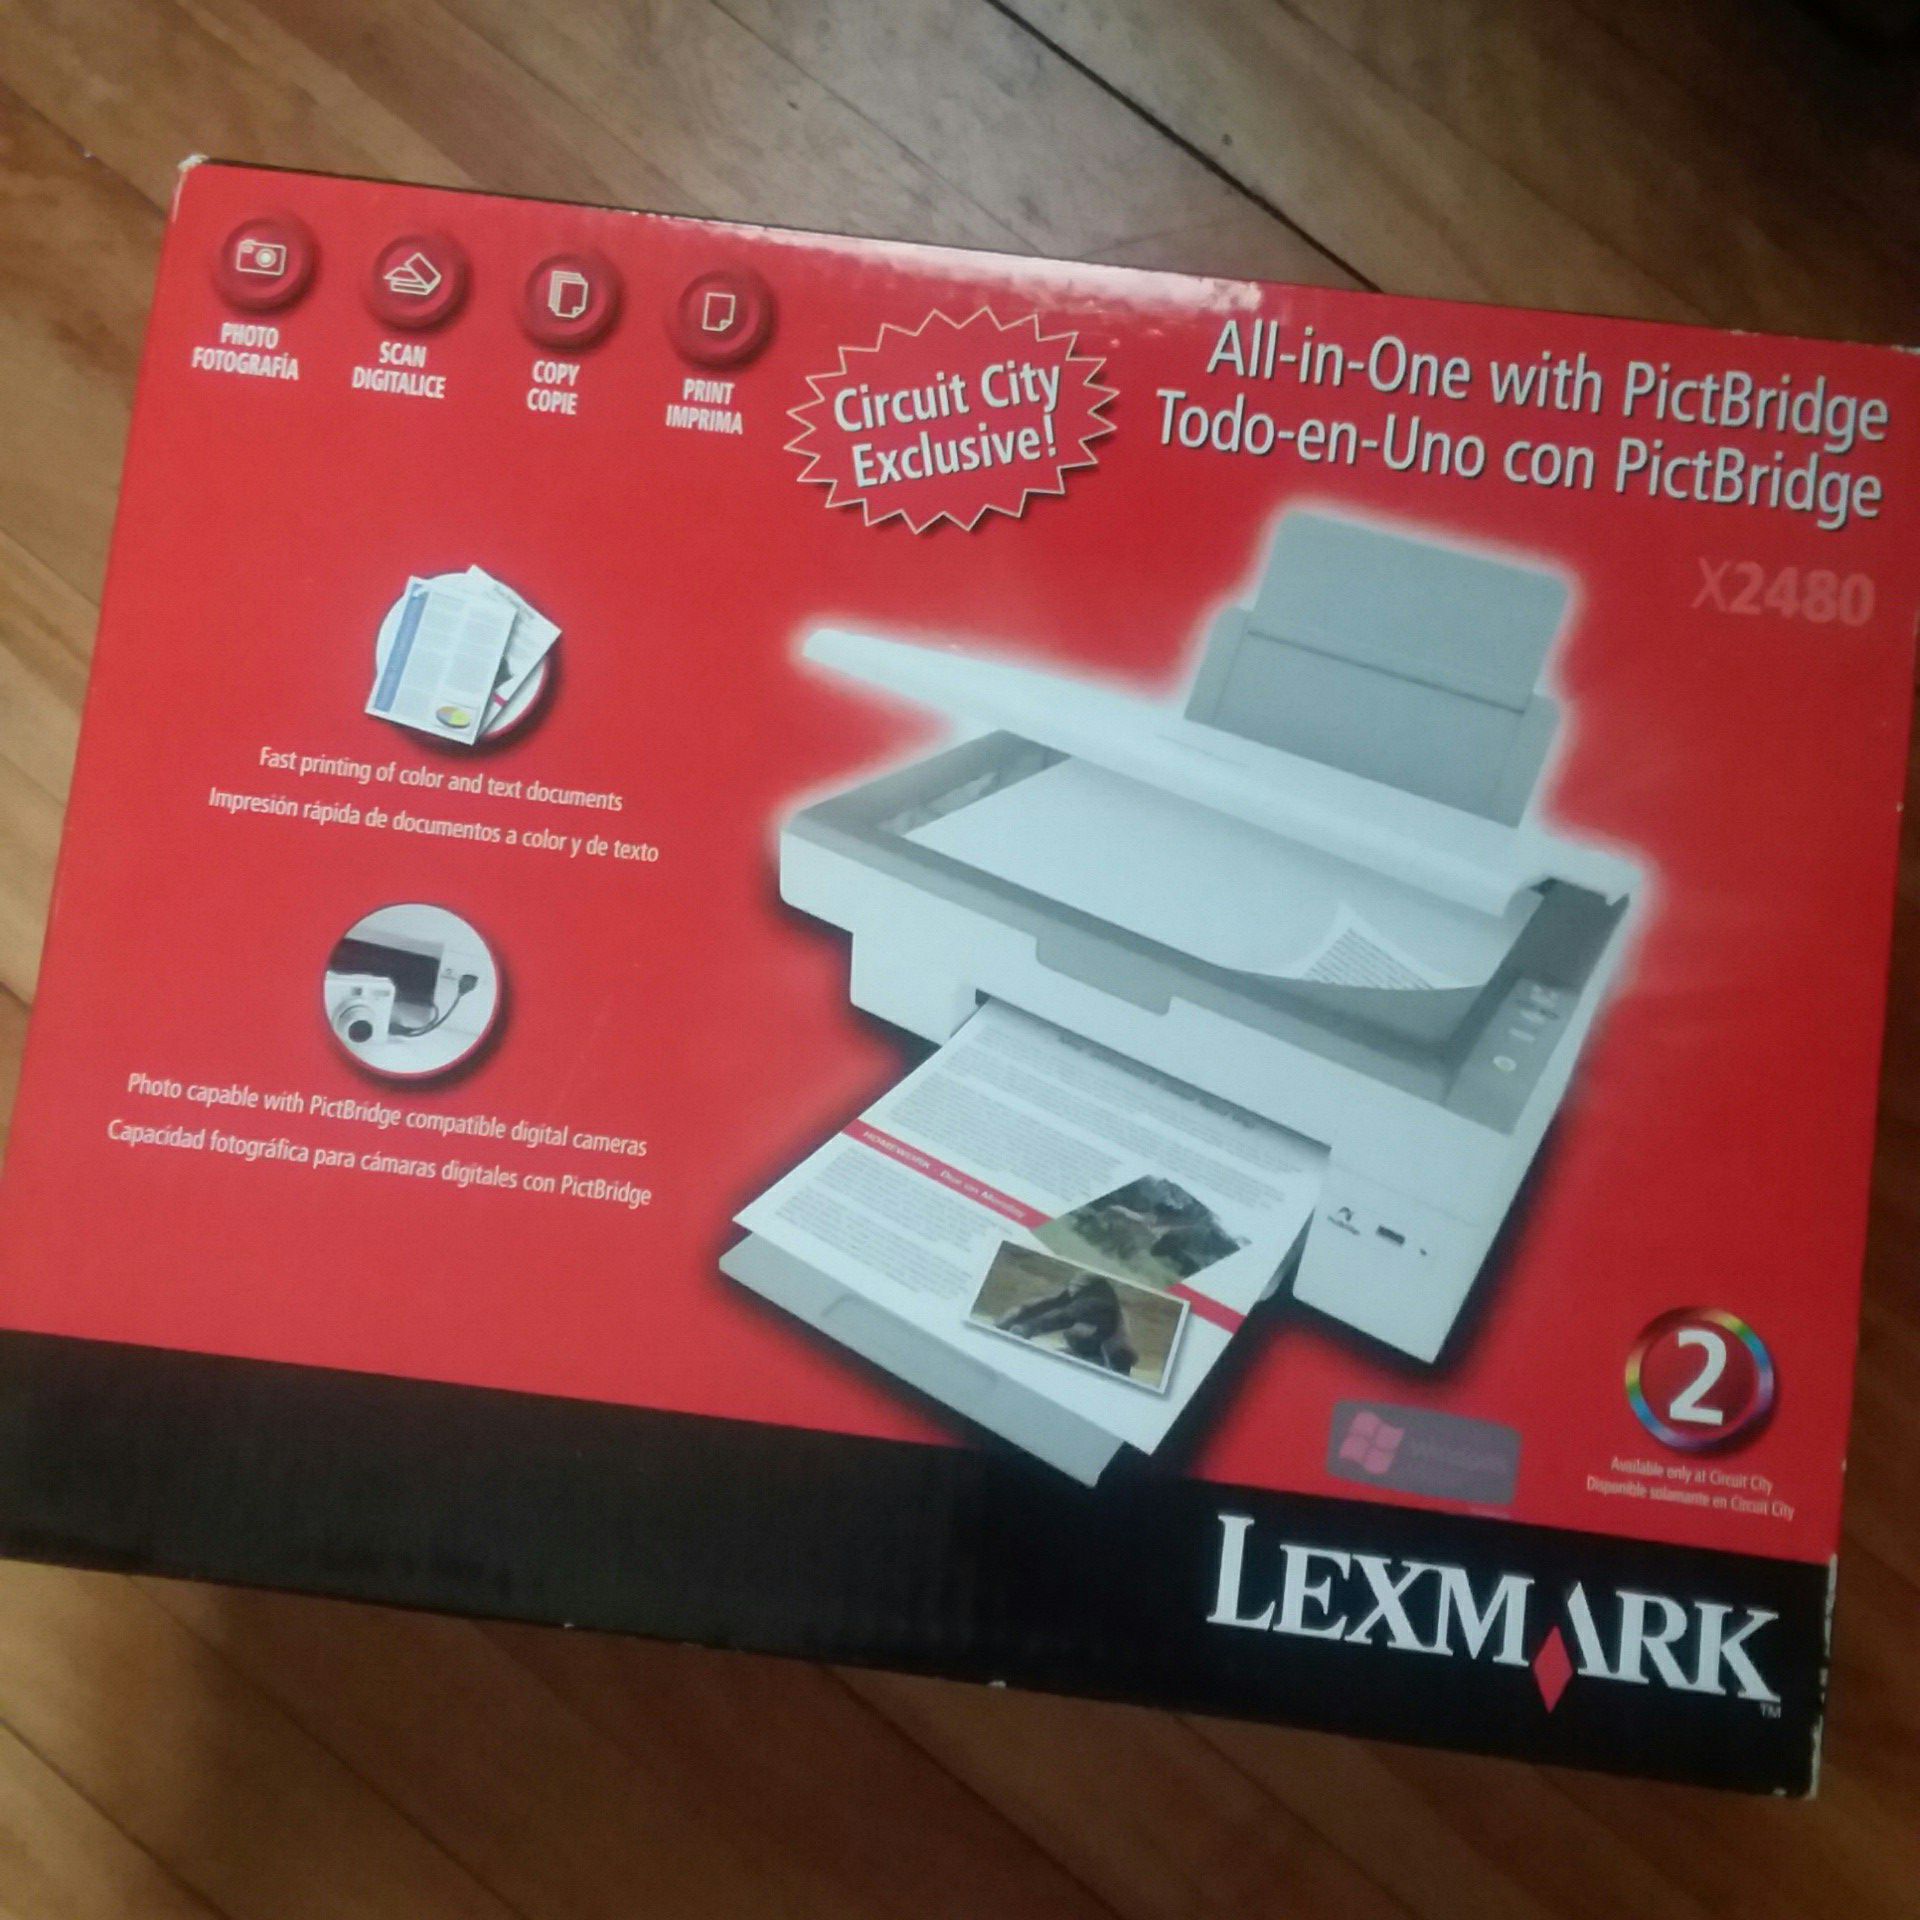 Brand New Lexmark x2480 All-in-One Printer Brand New, Never Opened sealed box